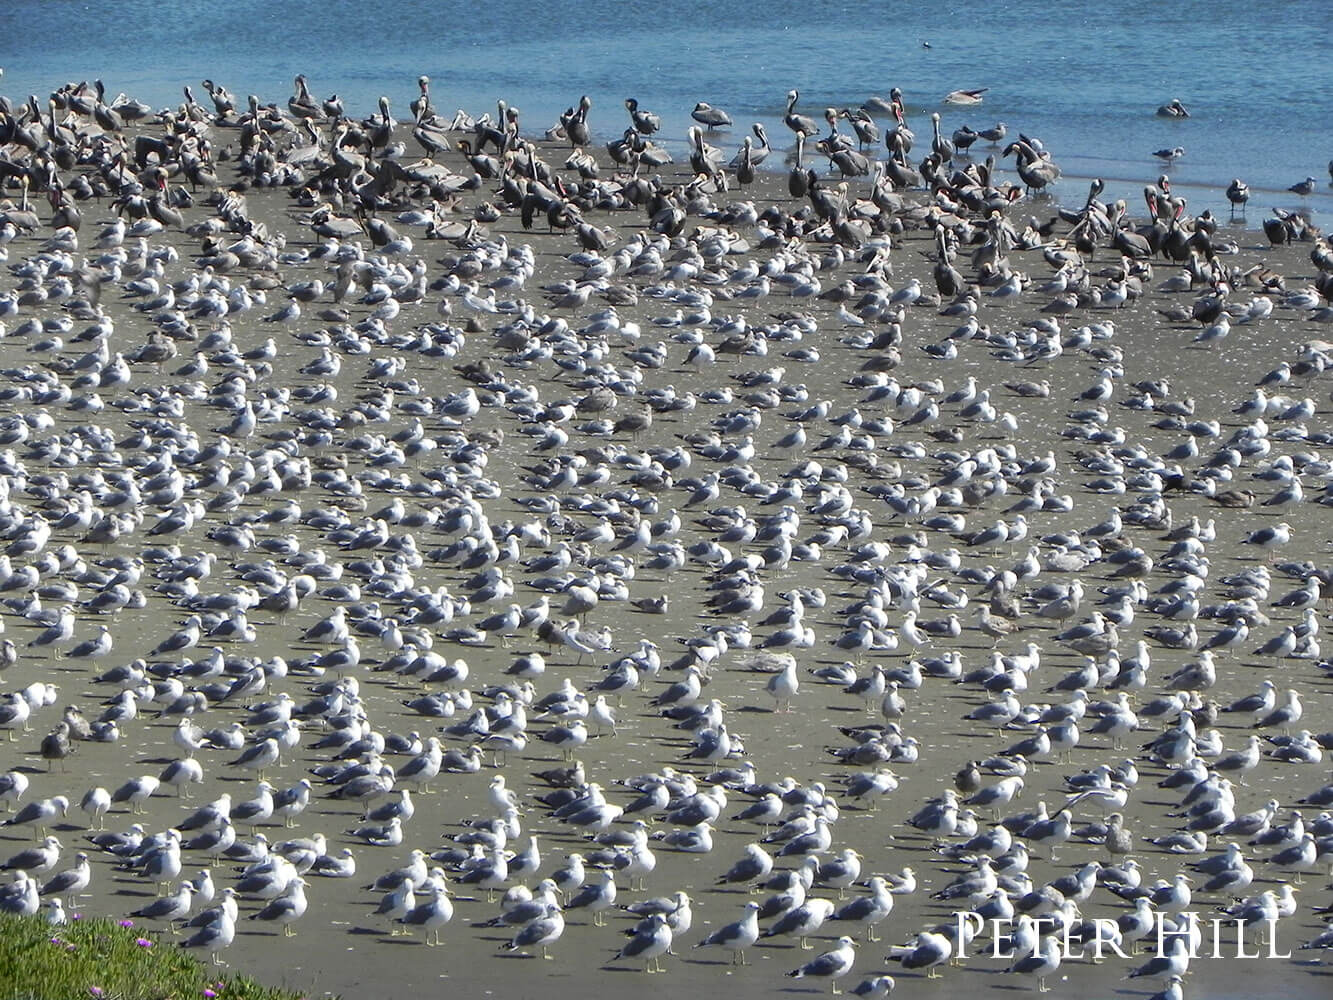 A beach filled with seagulls and pelicans.